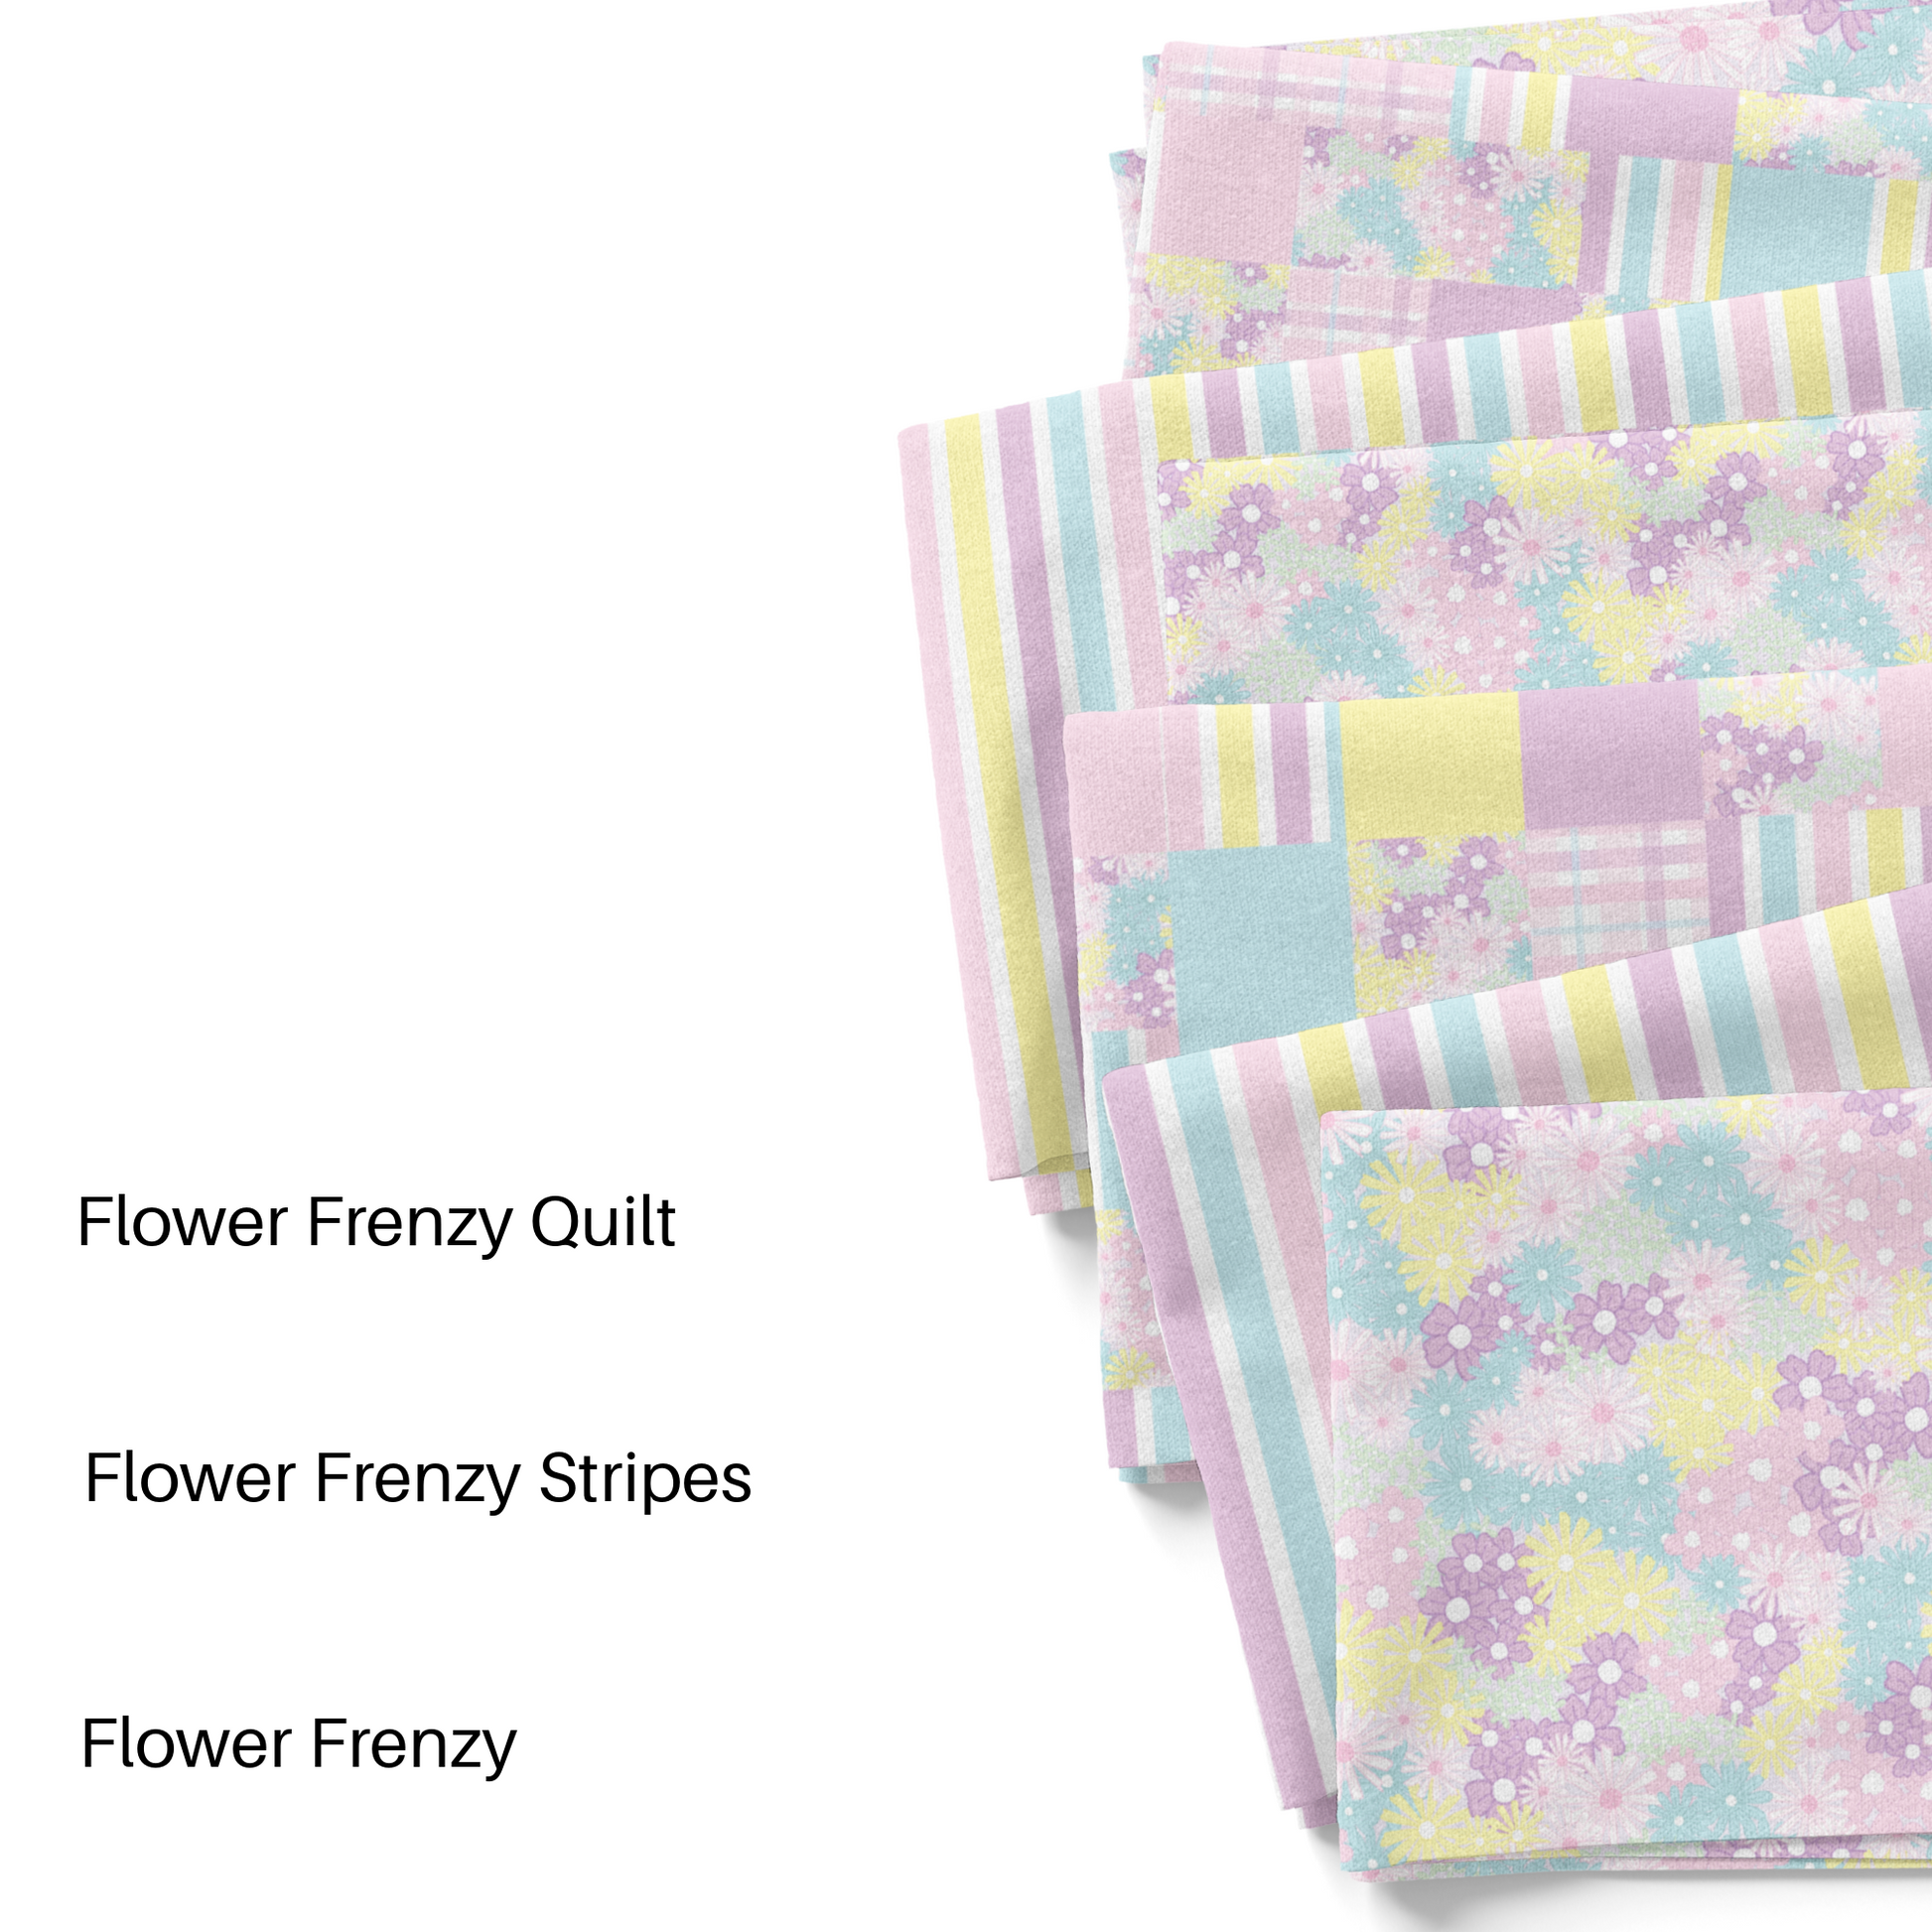 Wallflower Graphics "Flower Frenzy" Spring Fabric by the Yard Collection.